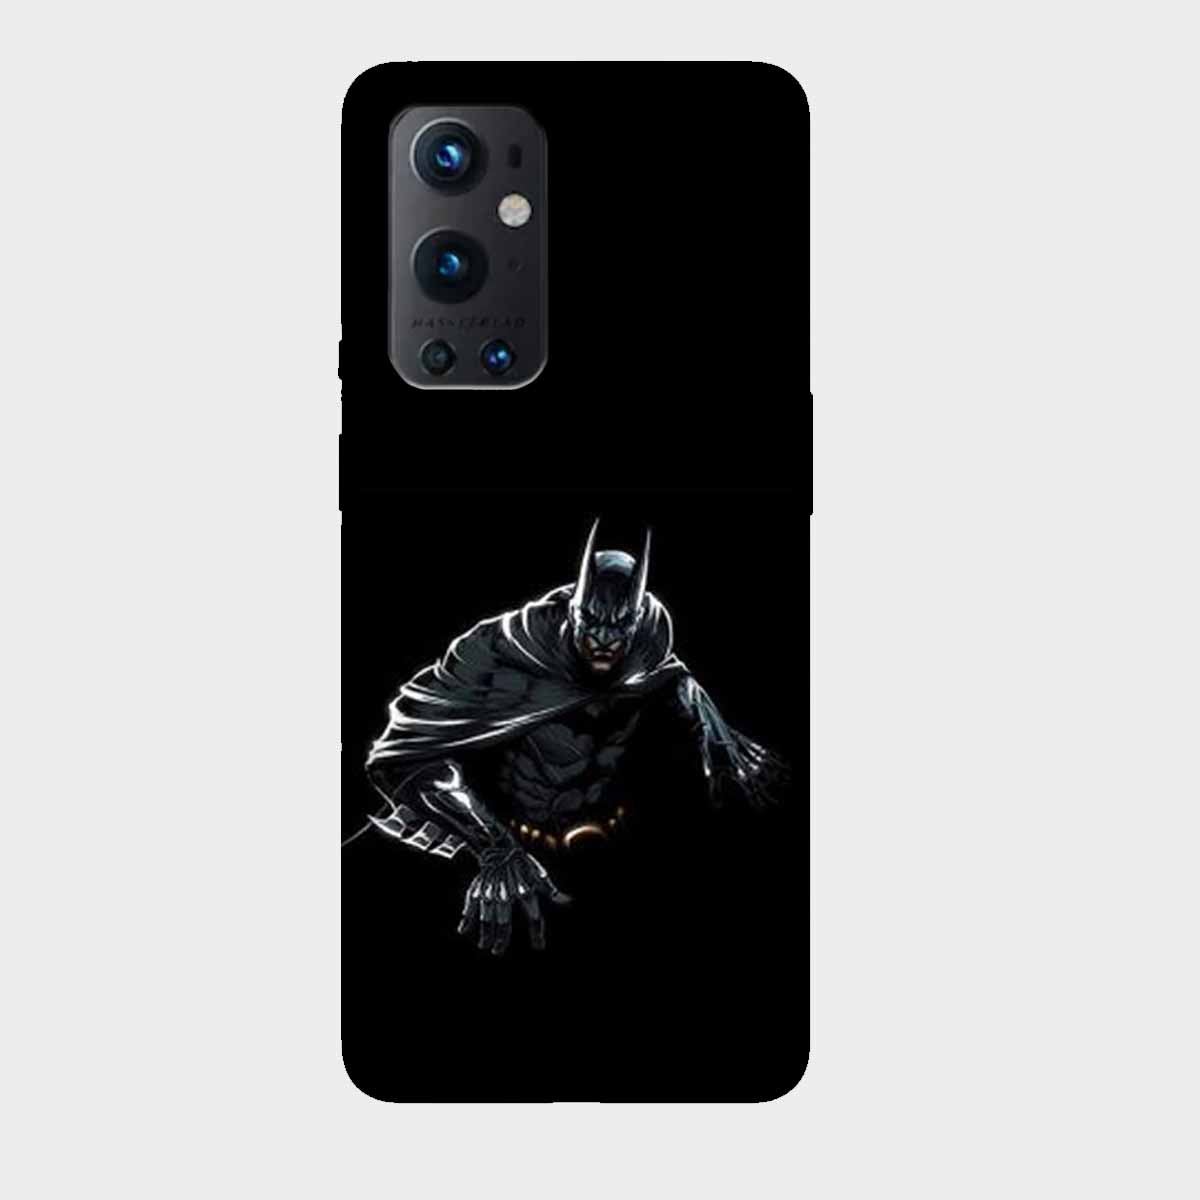 Batman - Ready for Action - Mobile Phone Cover - Hard Case - OnePlus